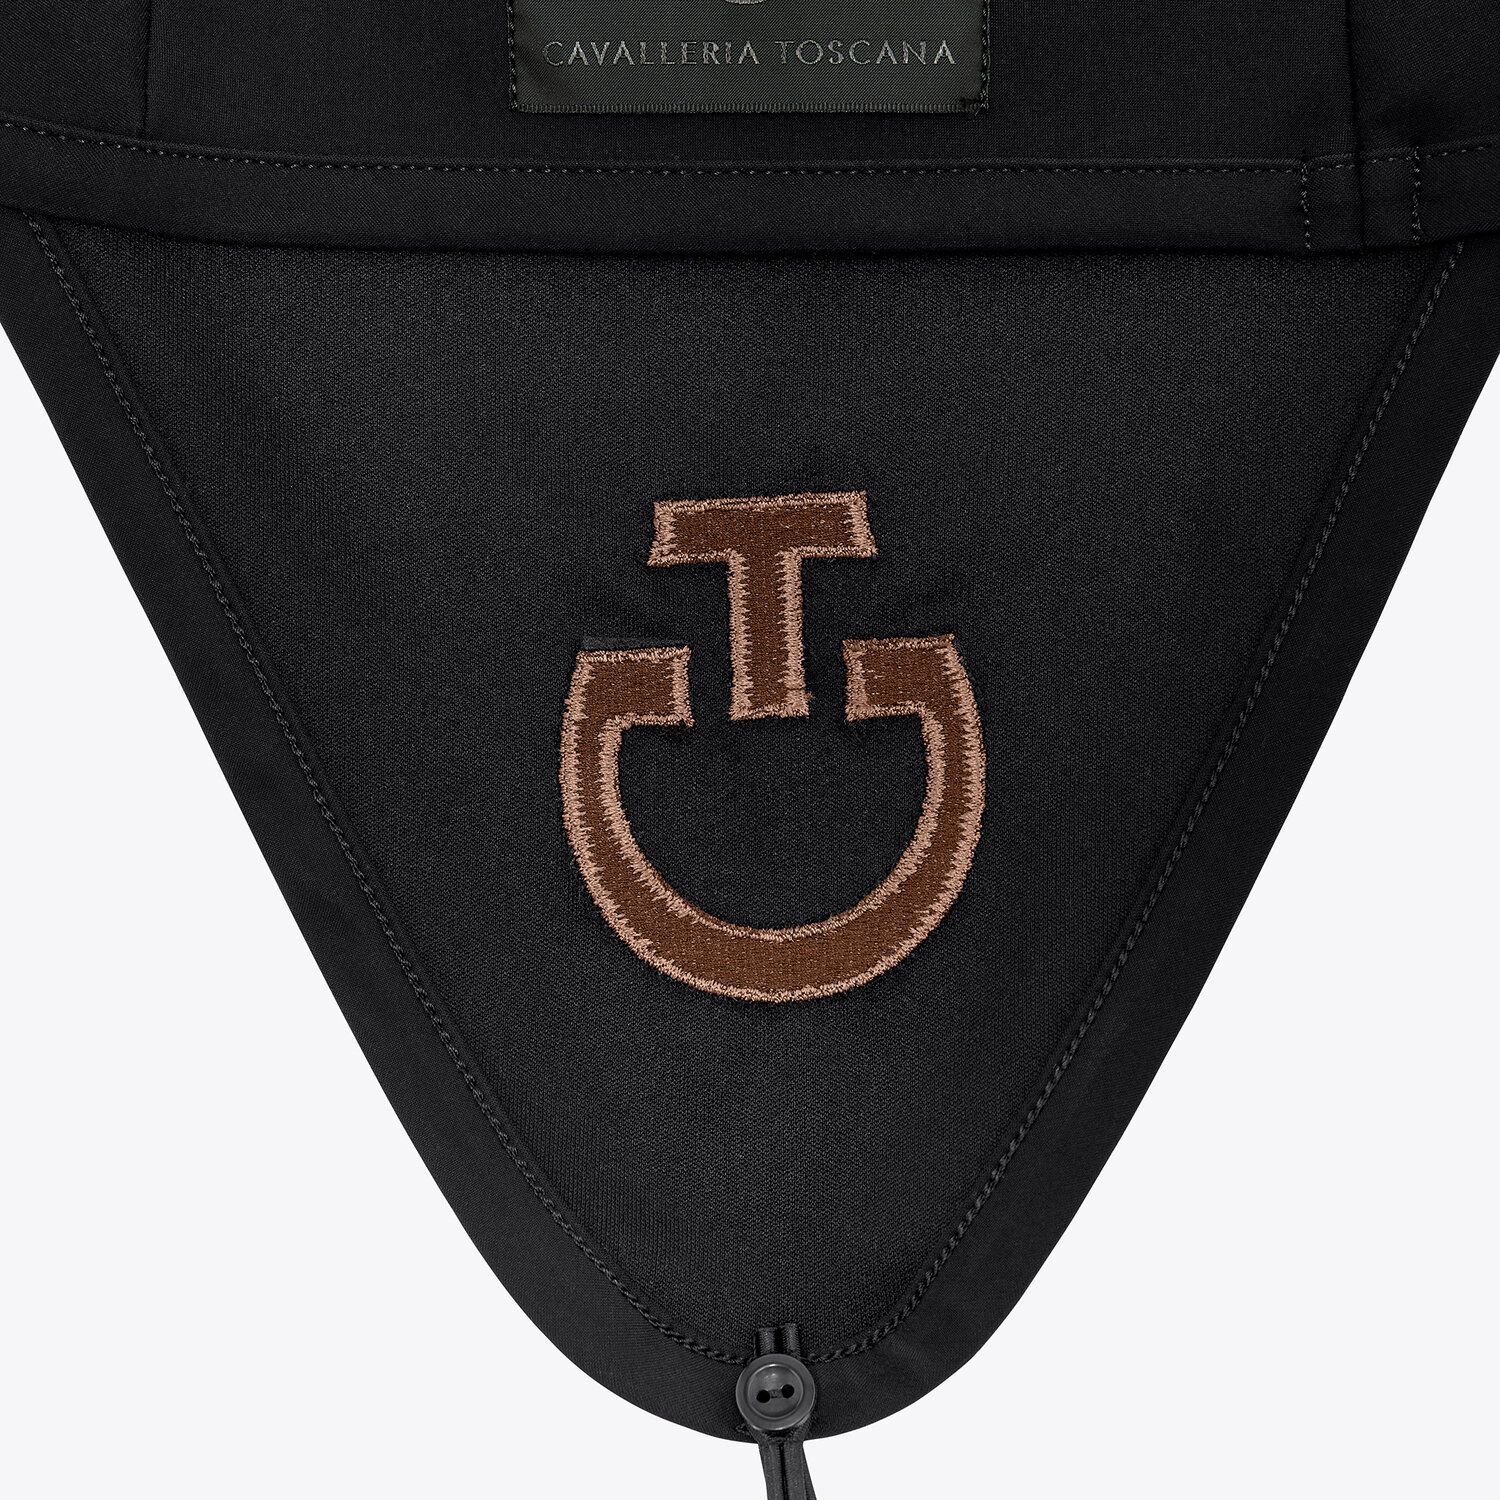 Cavalleria Toscana Lightweight jersey attachable soundless earnet BLACK/TOFFEE BROWN-2